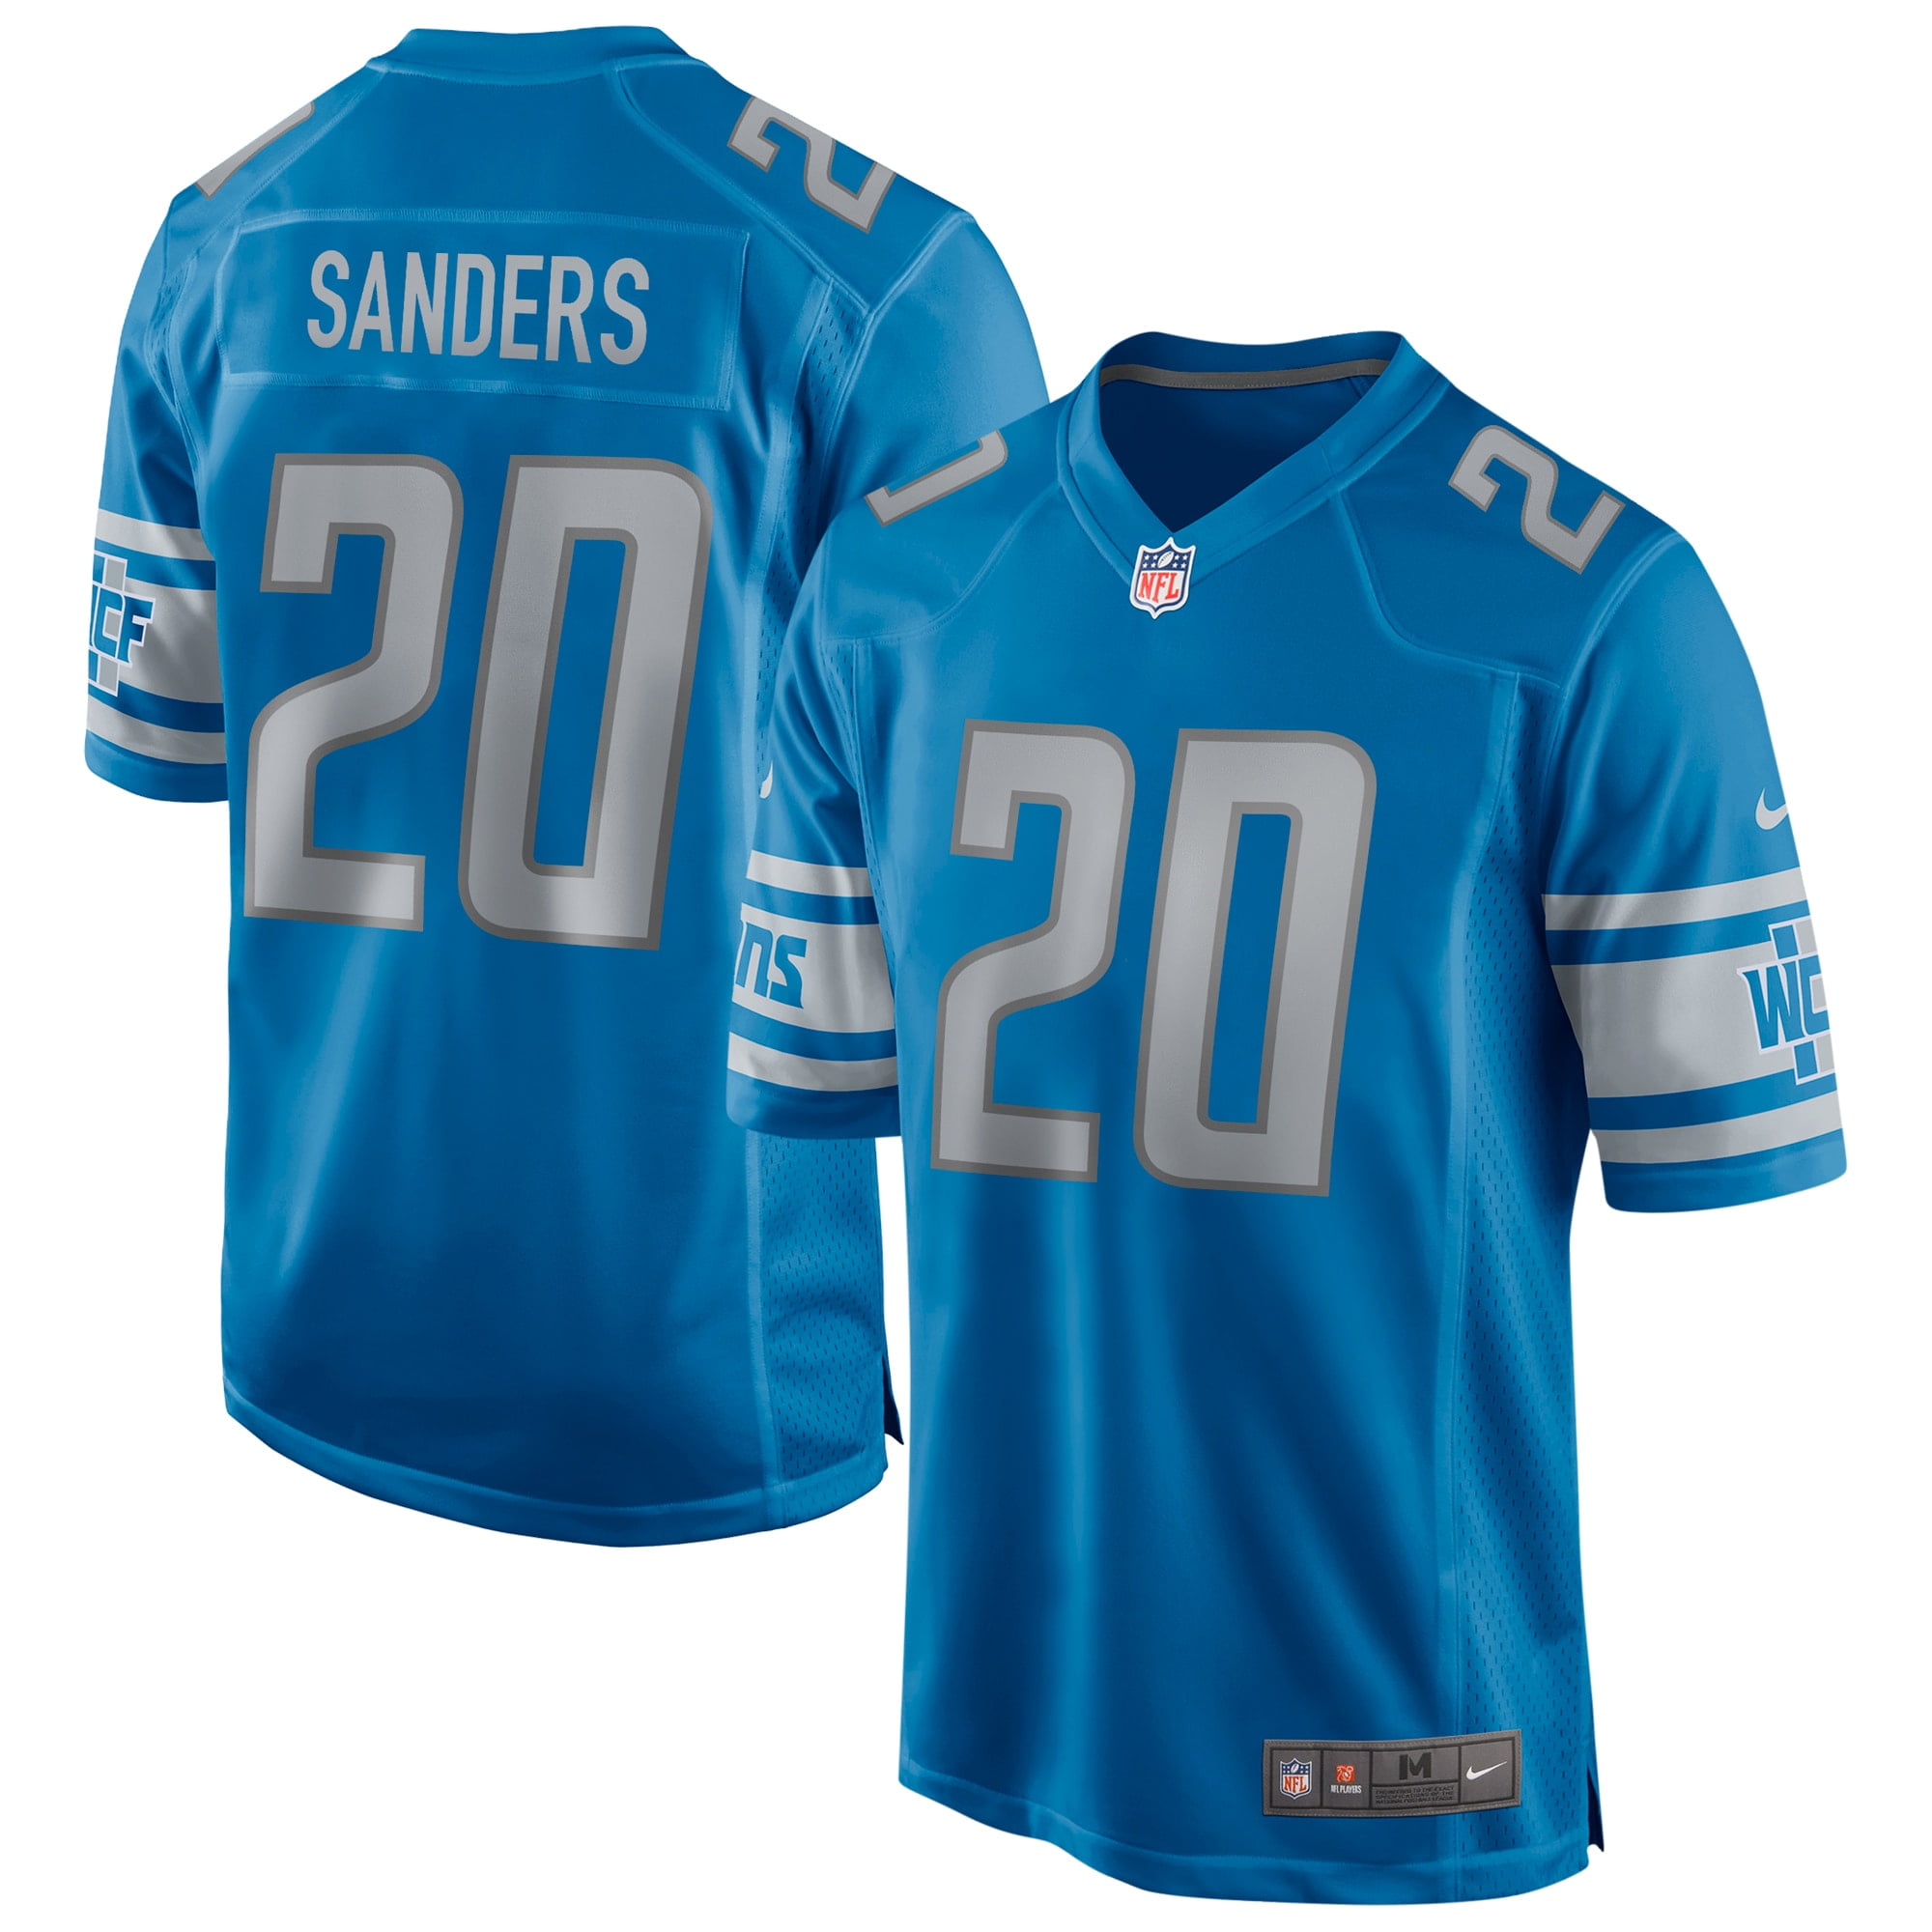 women's barry sanders jersey,Save up to 16%,www.ilcascinone.com